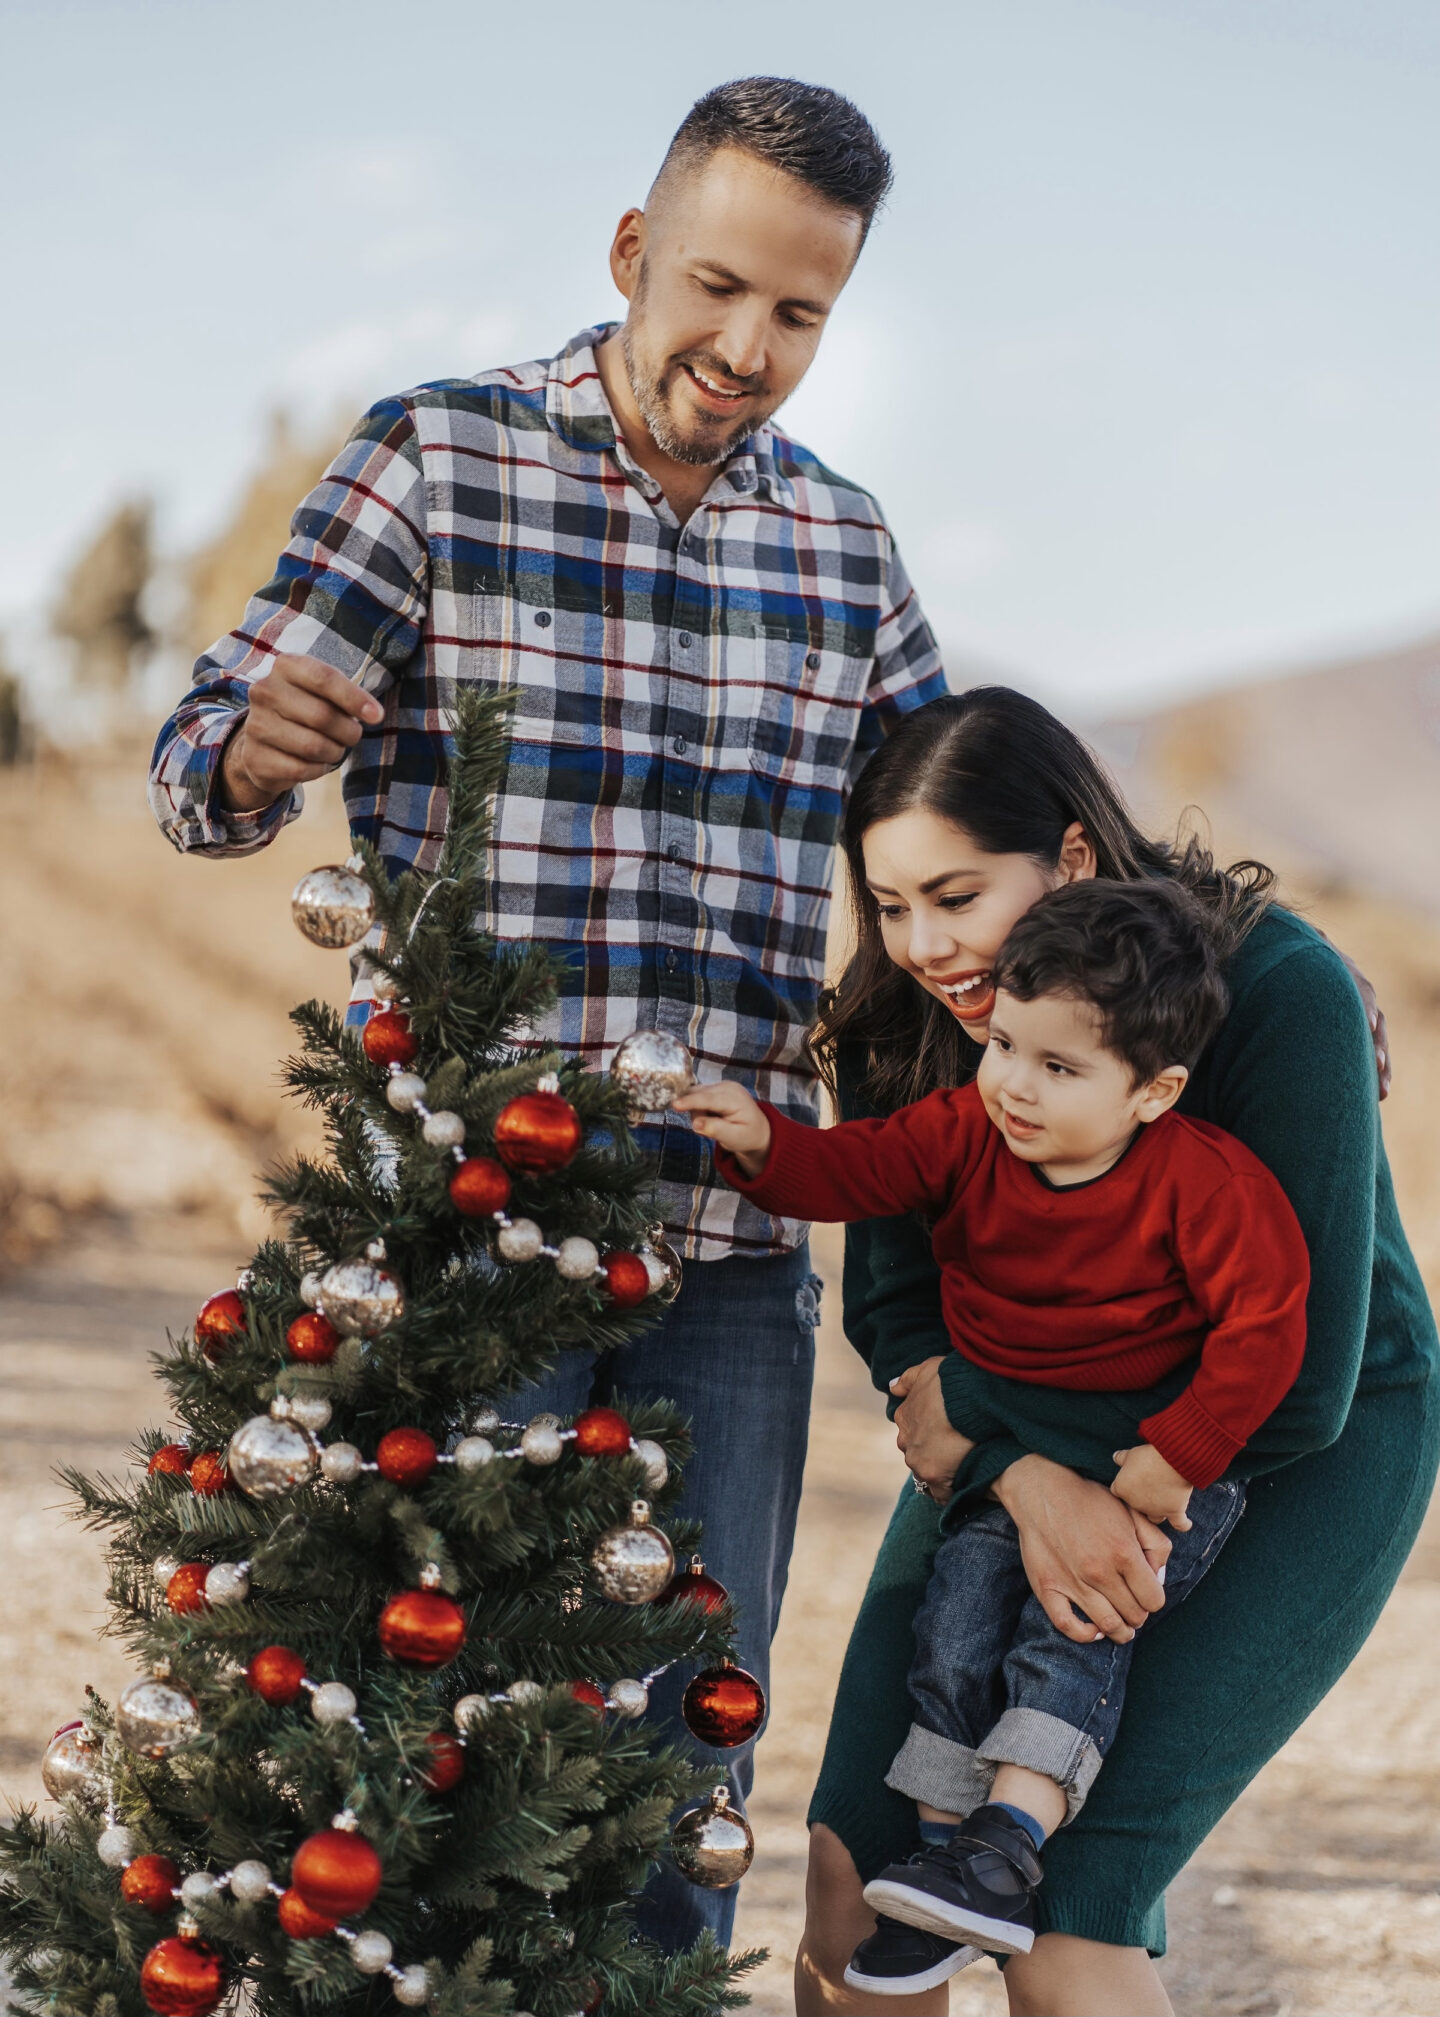 What to wear for Family Holiday Pictures